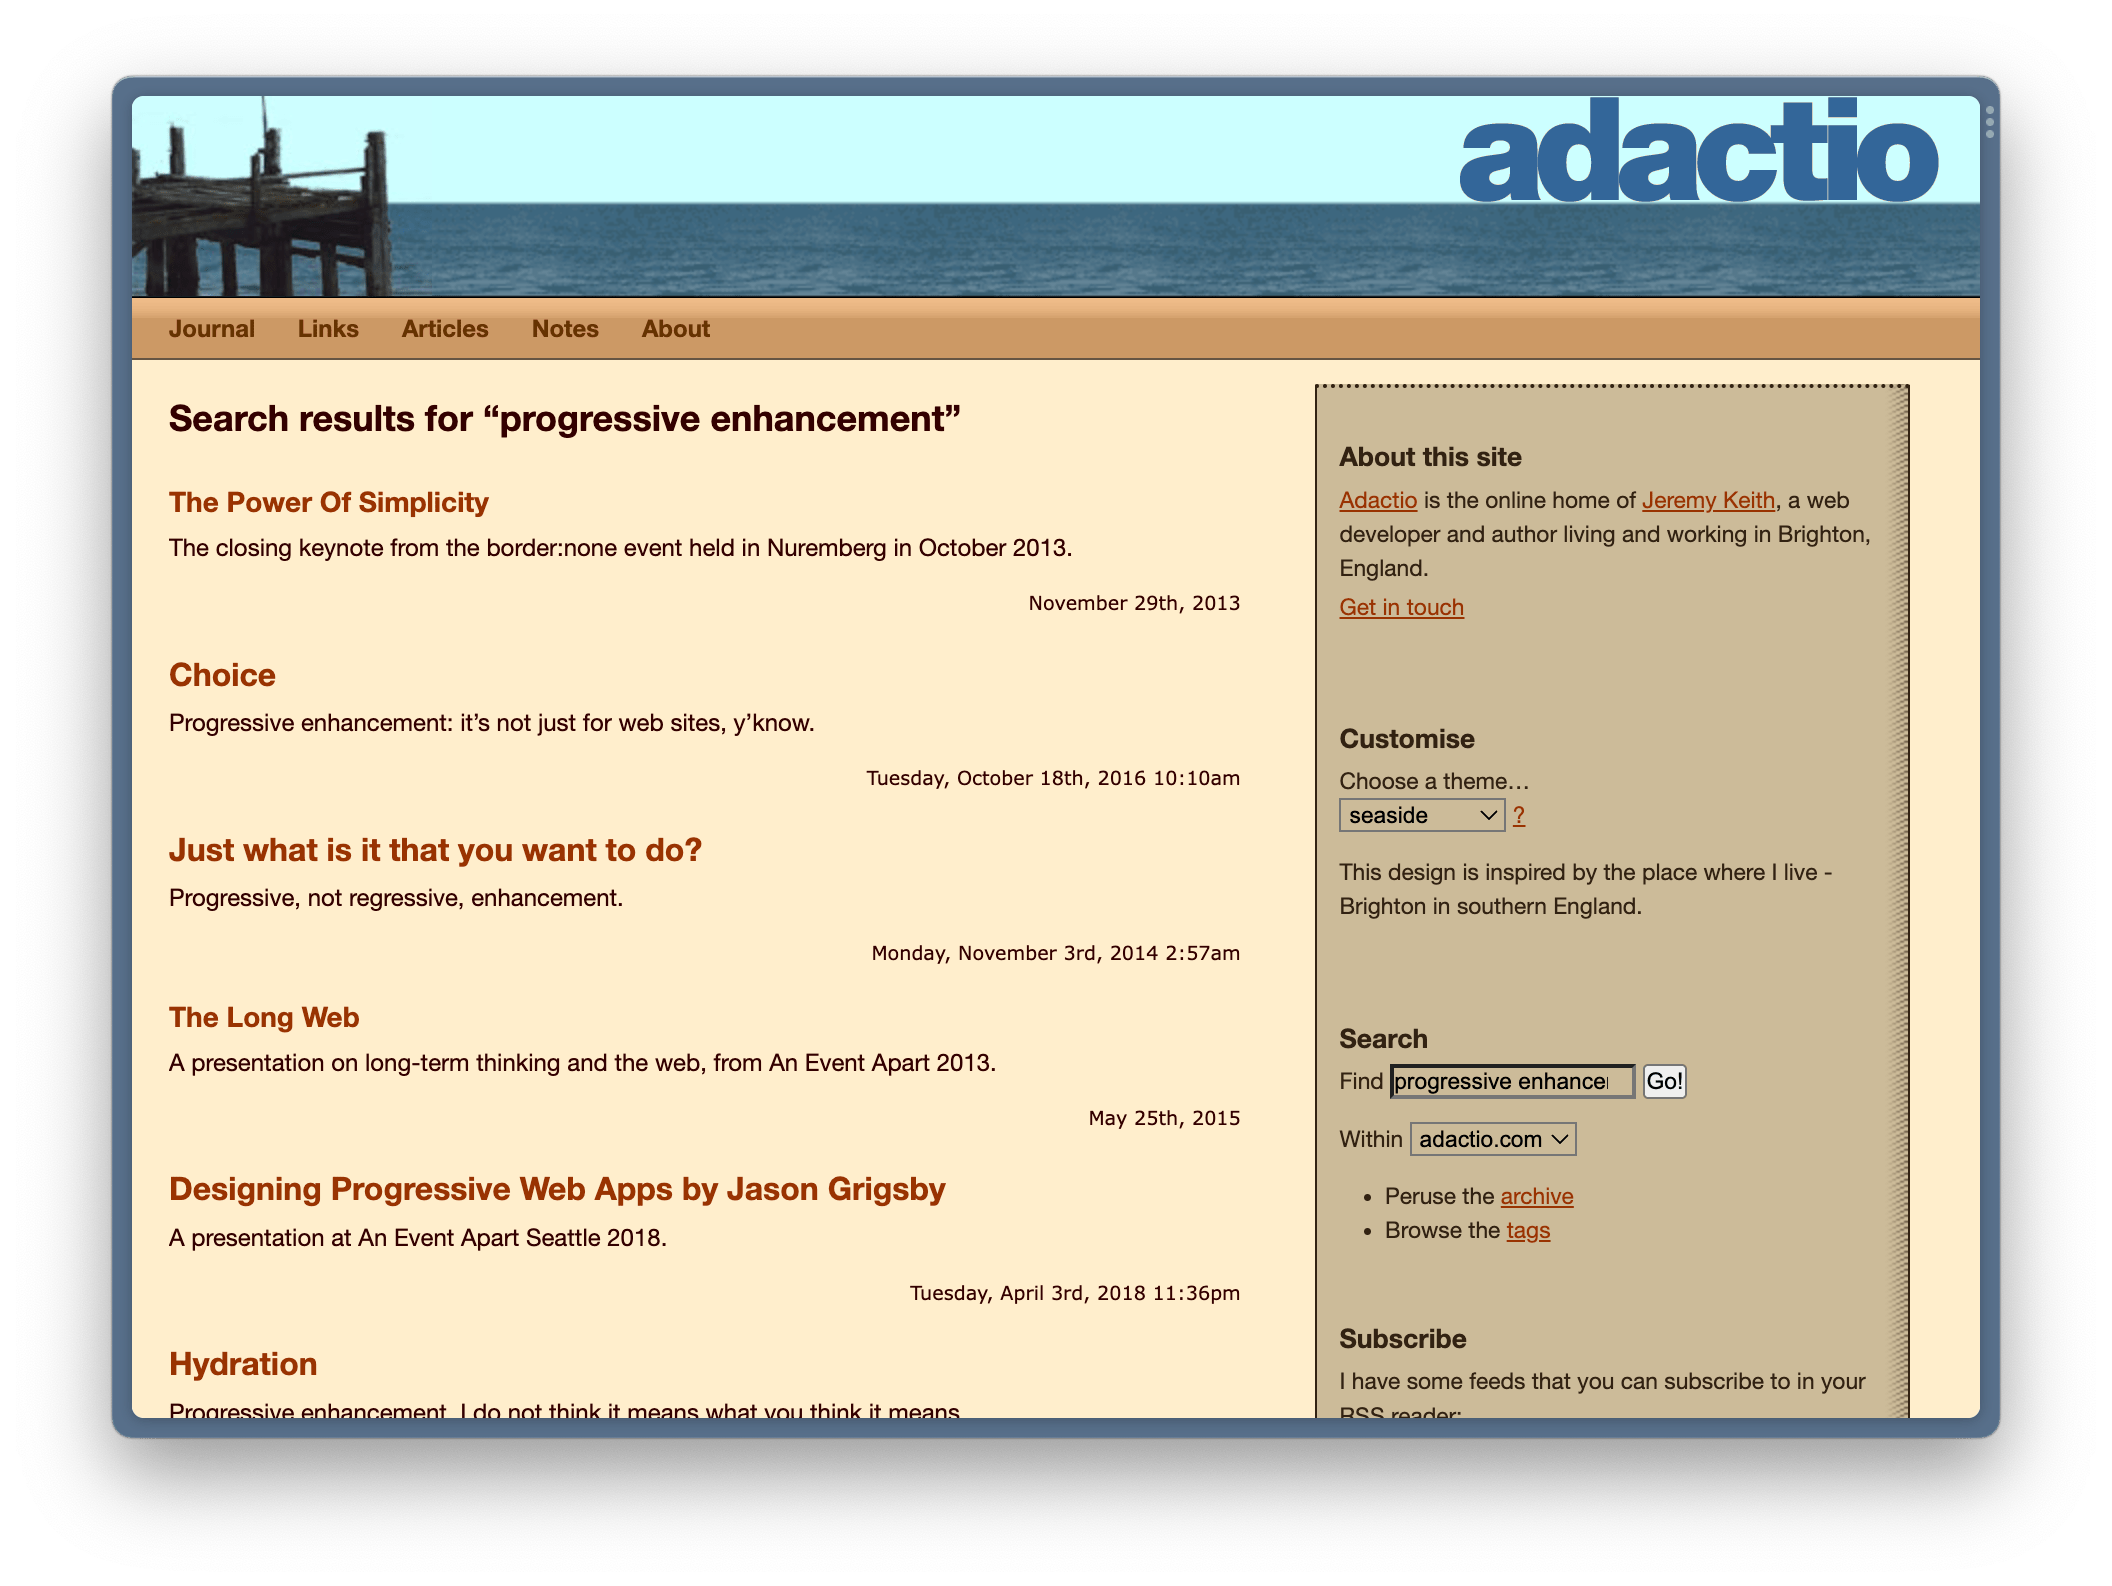 Screenshot of the search results page for the phrase “progressive enhancements” for adactio.com